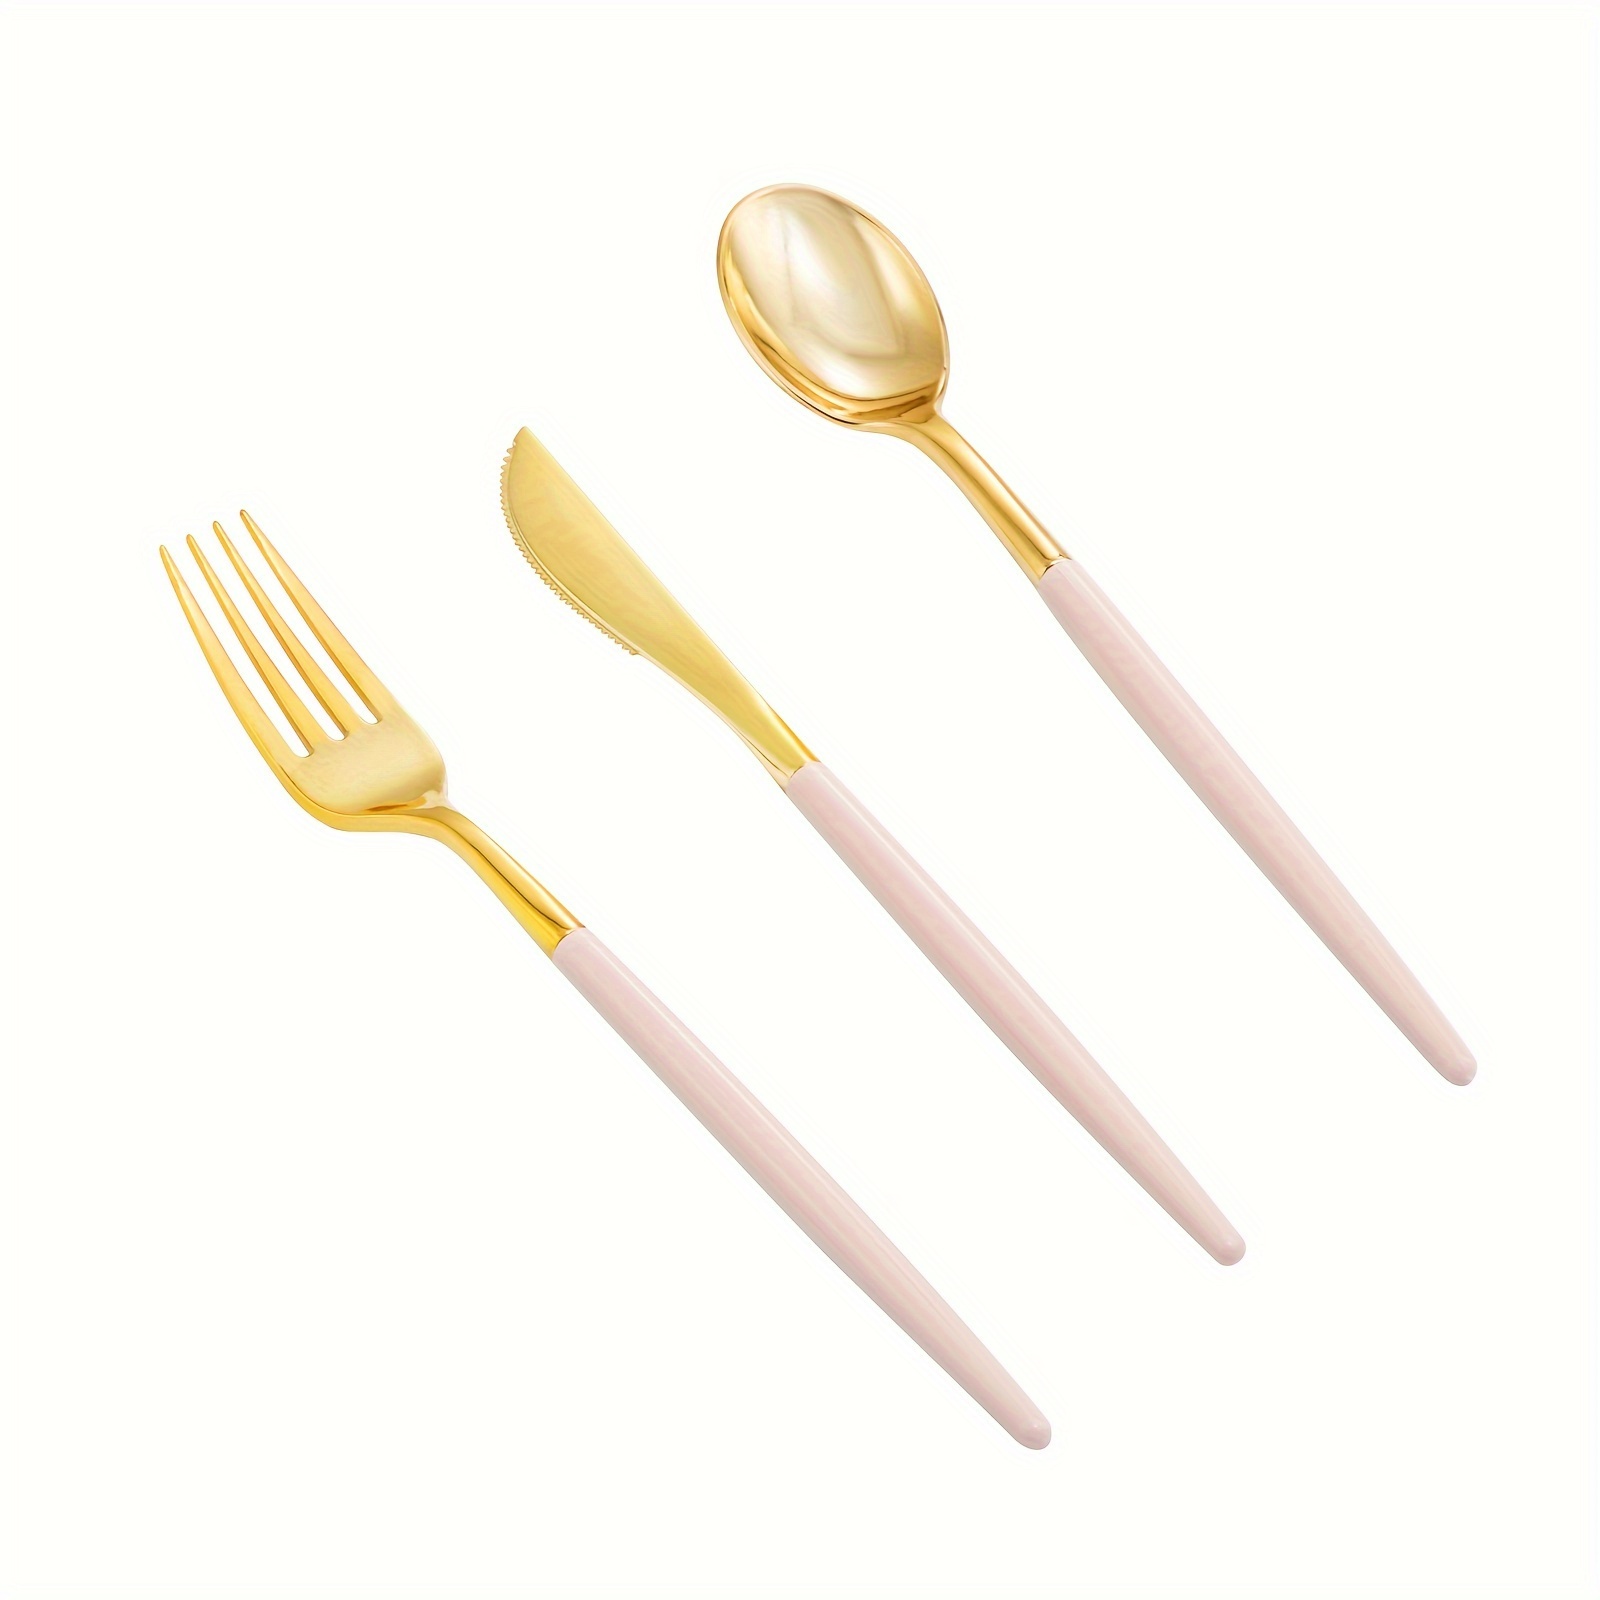 

90pcs Gold Plastic Silverware, Gold Plastic Utensils With Pink Handles Include 30 Plastic Gold Knives, 60 Plastic Forks And Spoons, Plastic Silverware Heavy Duty For Party